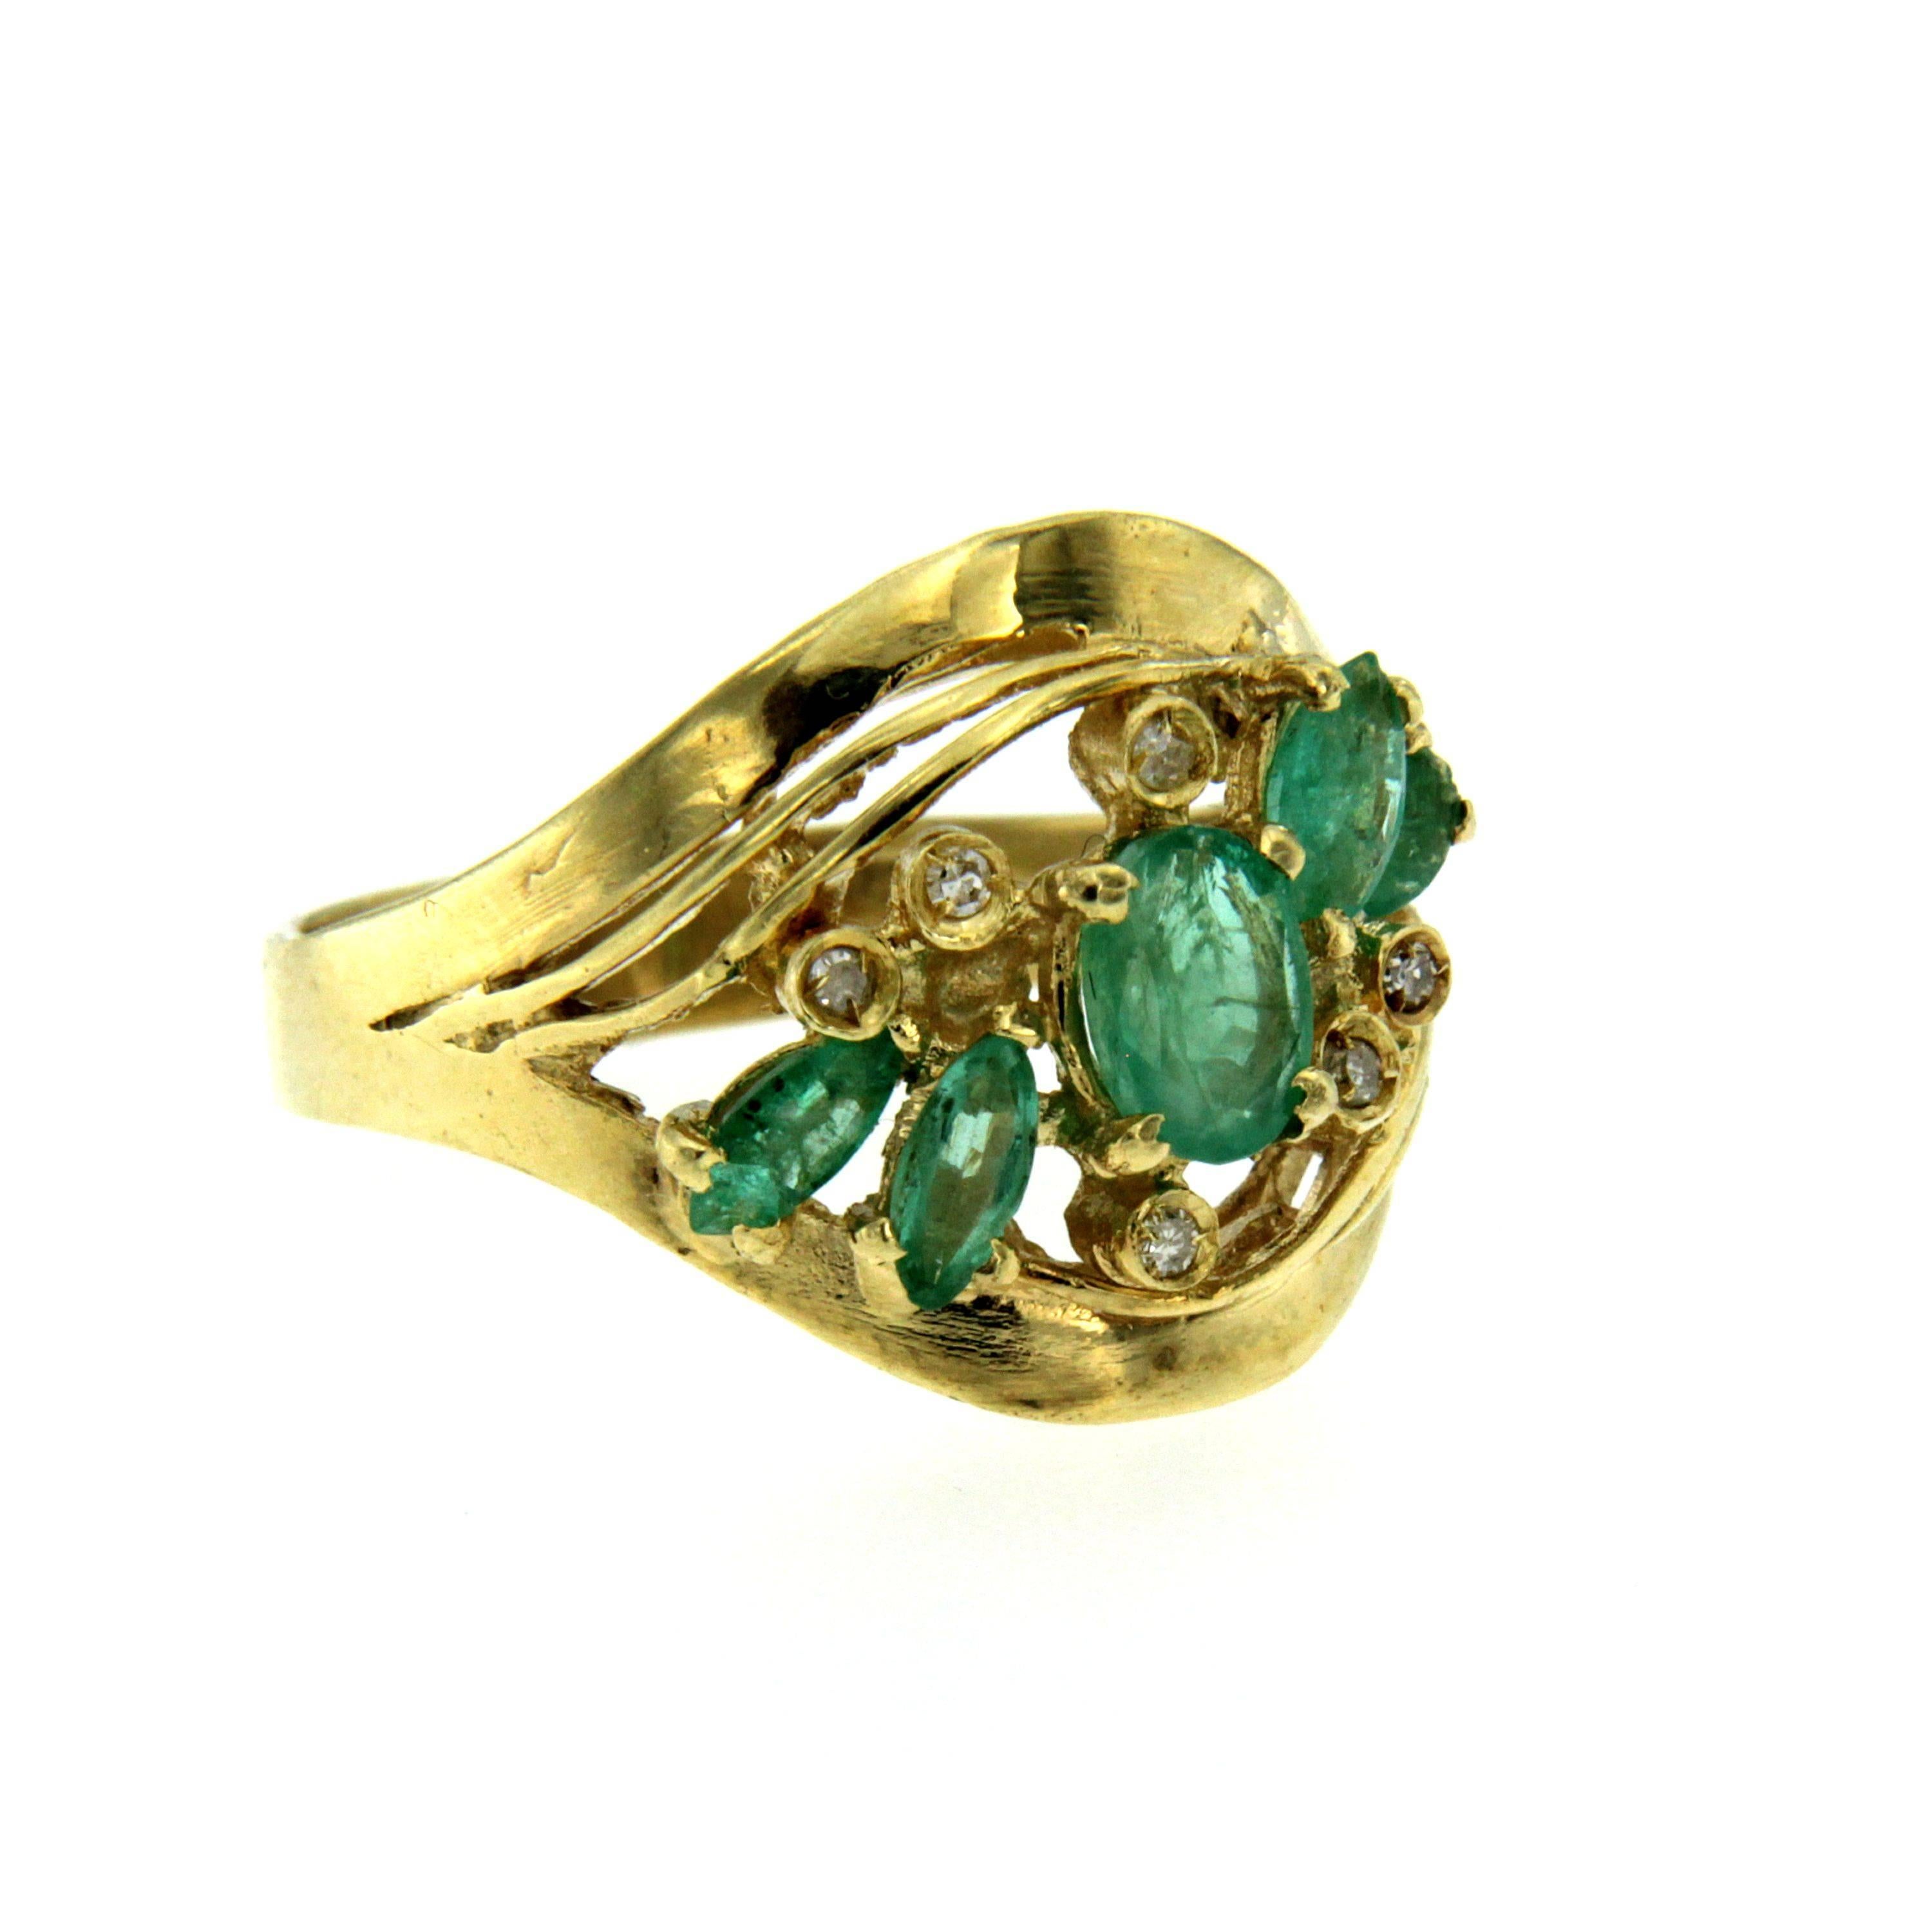 Gorgeous Retro ring handcrafted in 18k yellow gold set with 5 oval and marquise cut emerald weighing 1.00 carats accented by 6 small round brilliant cut diamonds 0.06 total carats. Circa 1950

CONDITION: Pre-owned - Excellent
METAL: 18k Gold
GEM